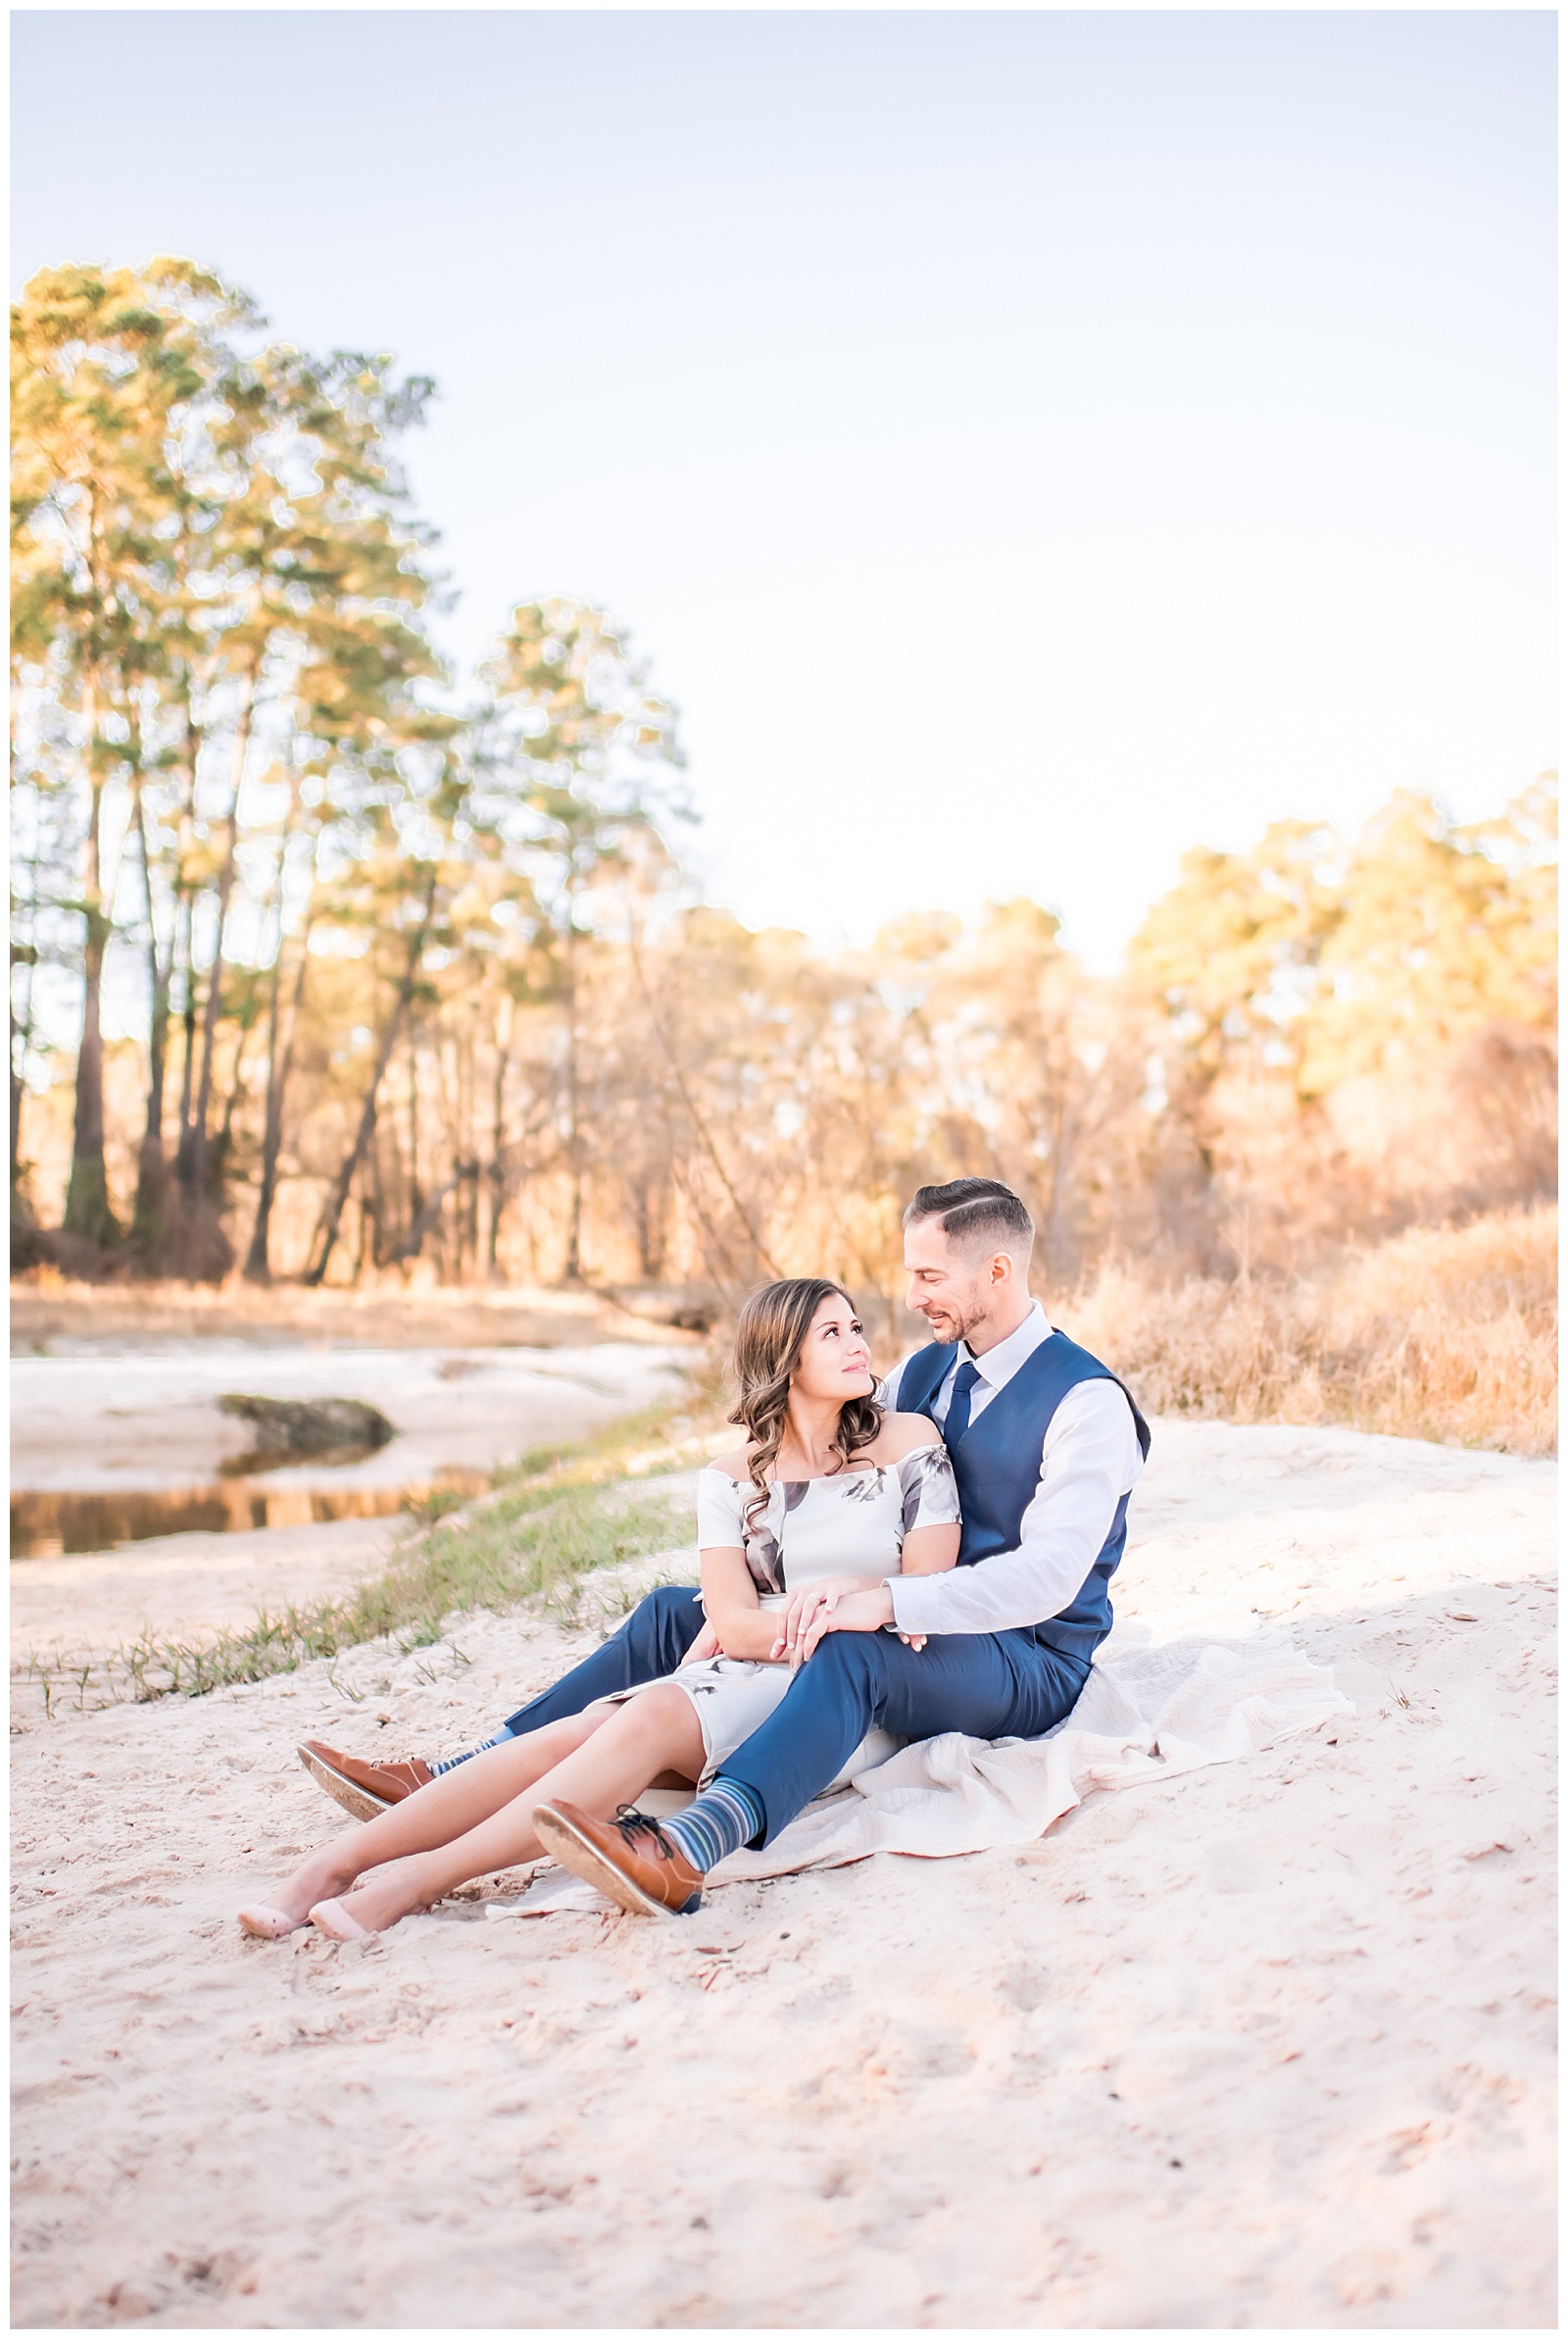 Engagement Photography in The Woodlands Texas